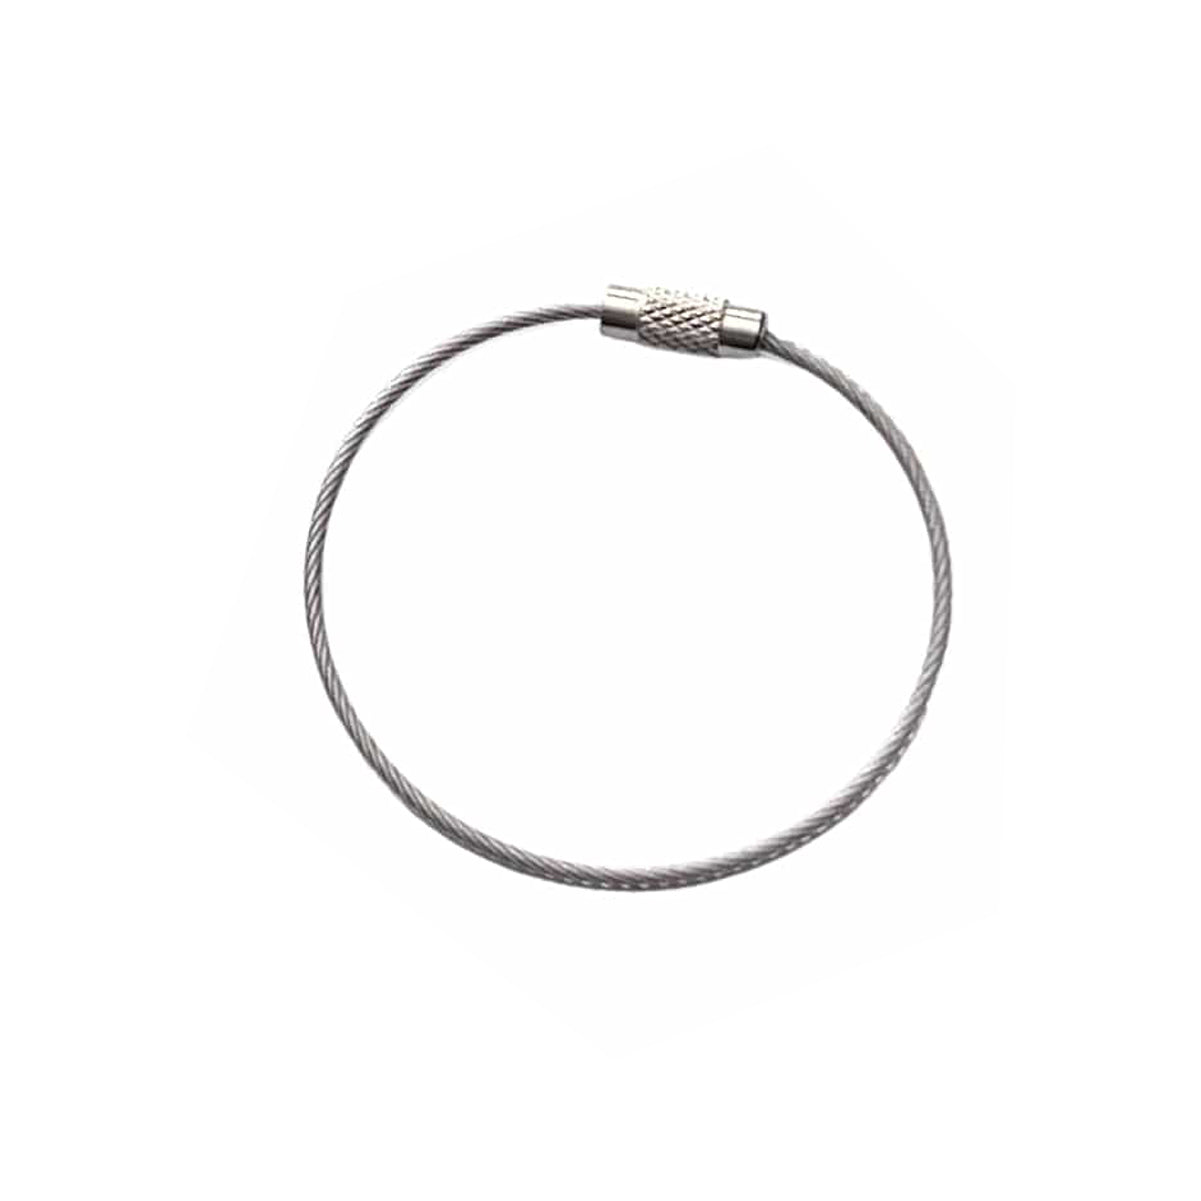 Wire Loop Luggage Tag Holders - 6 inch Metal Stainless Steel Cable Ring  Connectors for Keys or Luggage Tags